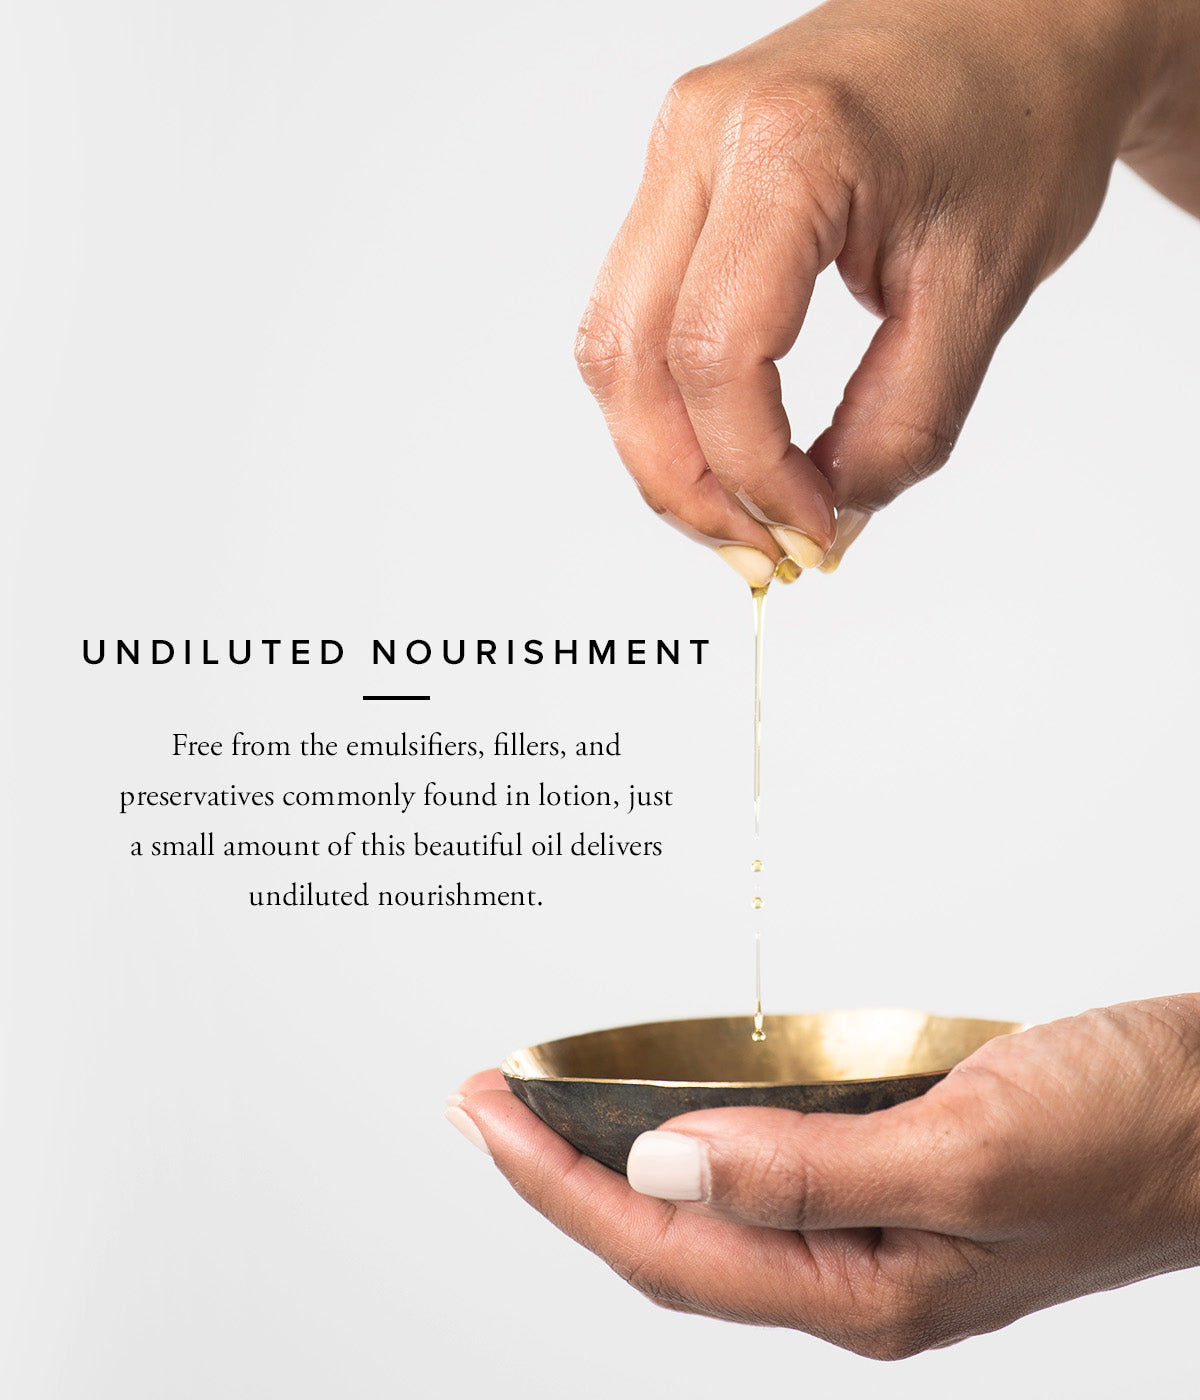 Undiluted Nourishment - Free from the emulsifiers, fillers, and preservatives commonly found in lotion, just a small amount of this beautiful oil delivers undiluted nourishment